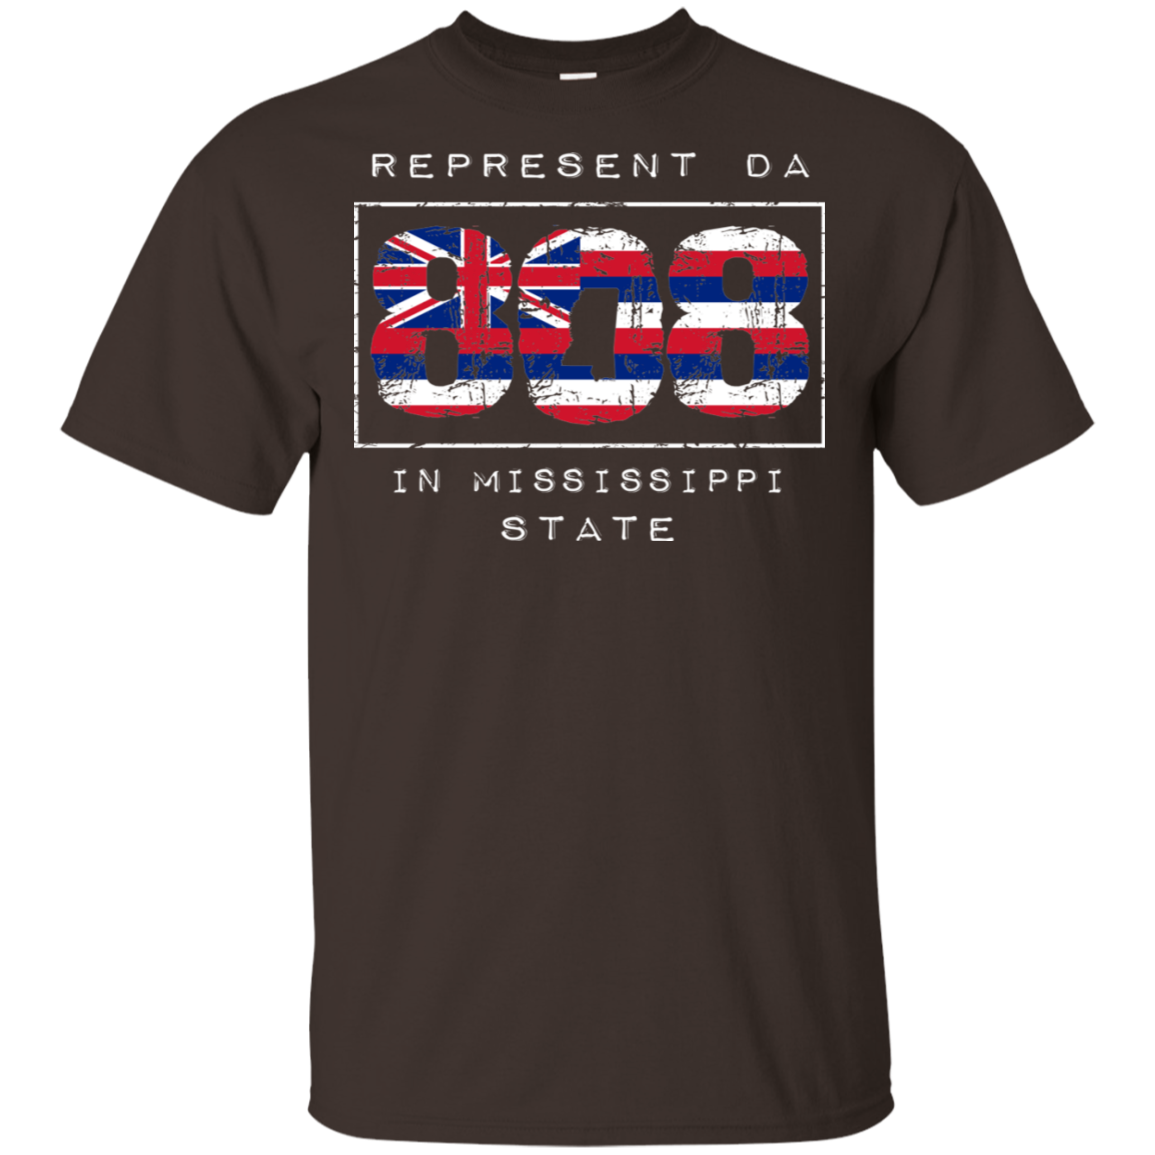 Rep Da 808 In Mississippi State Ultra Cotton T-Shirt, T-Shirts, Hawaii Nei All Day